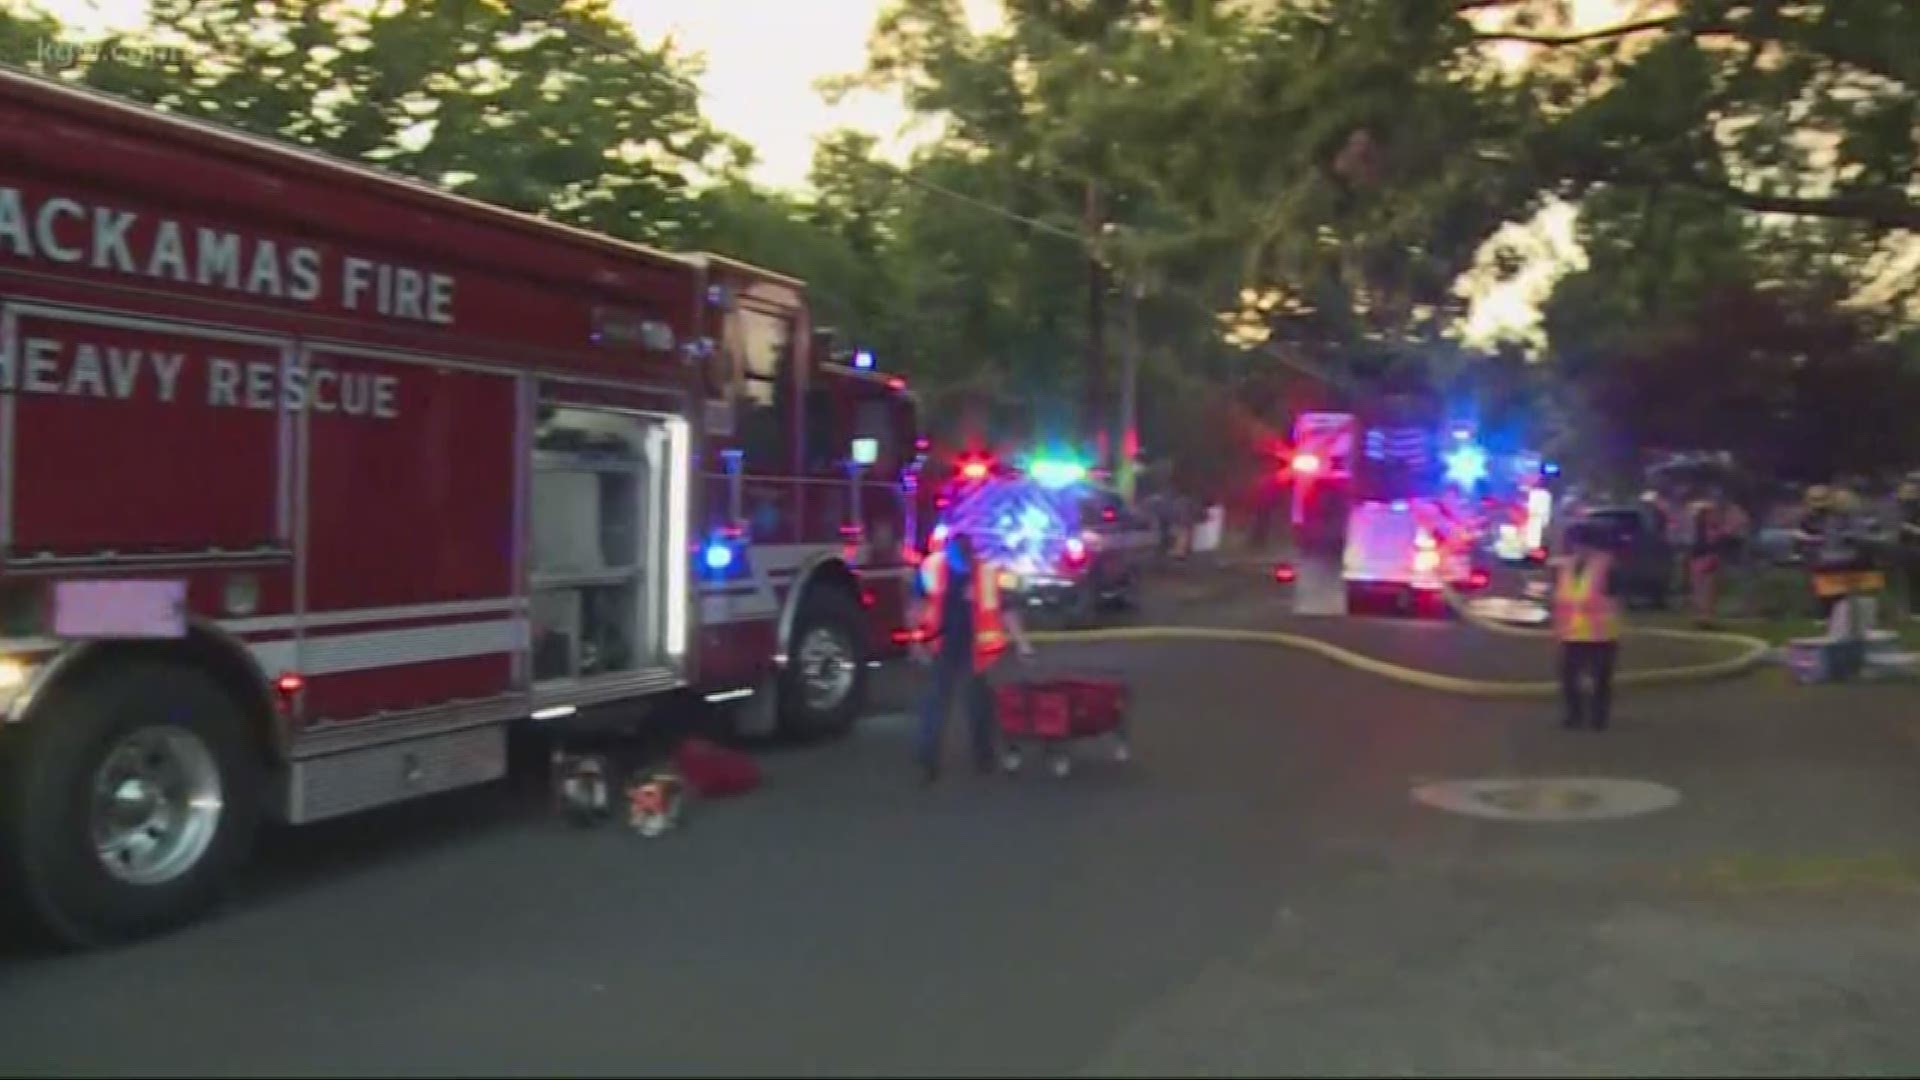 One person in critical condition after firefighters rescued him from a Milwaukie house fire